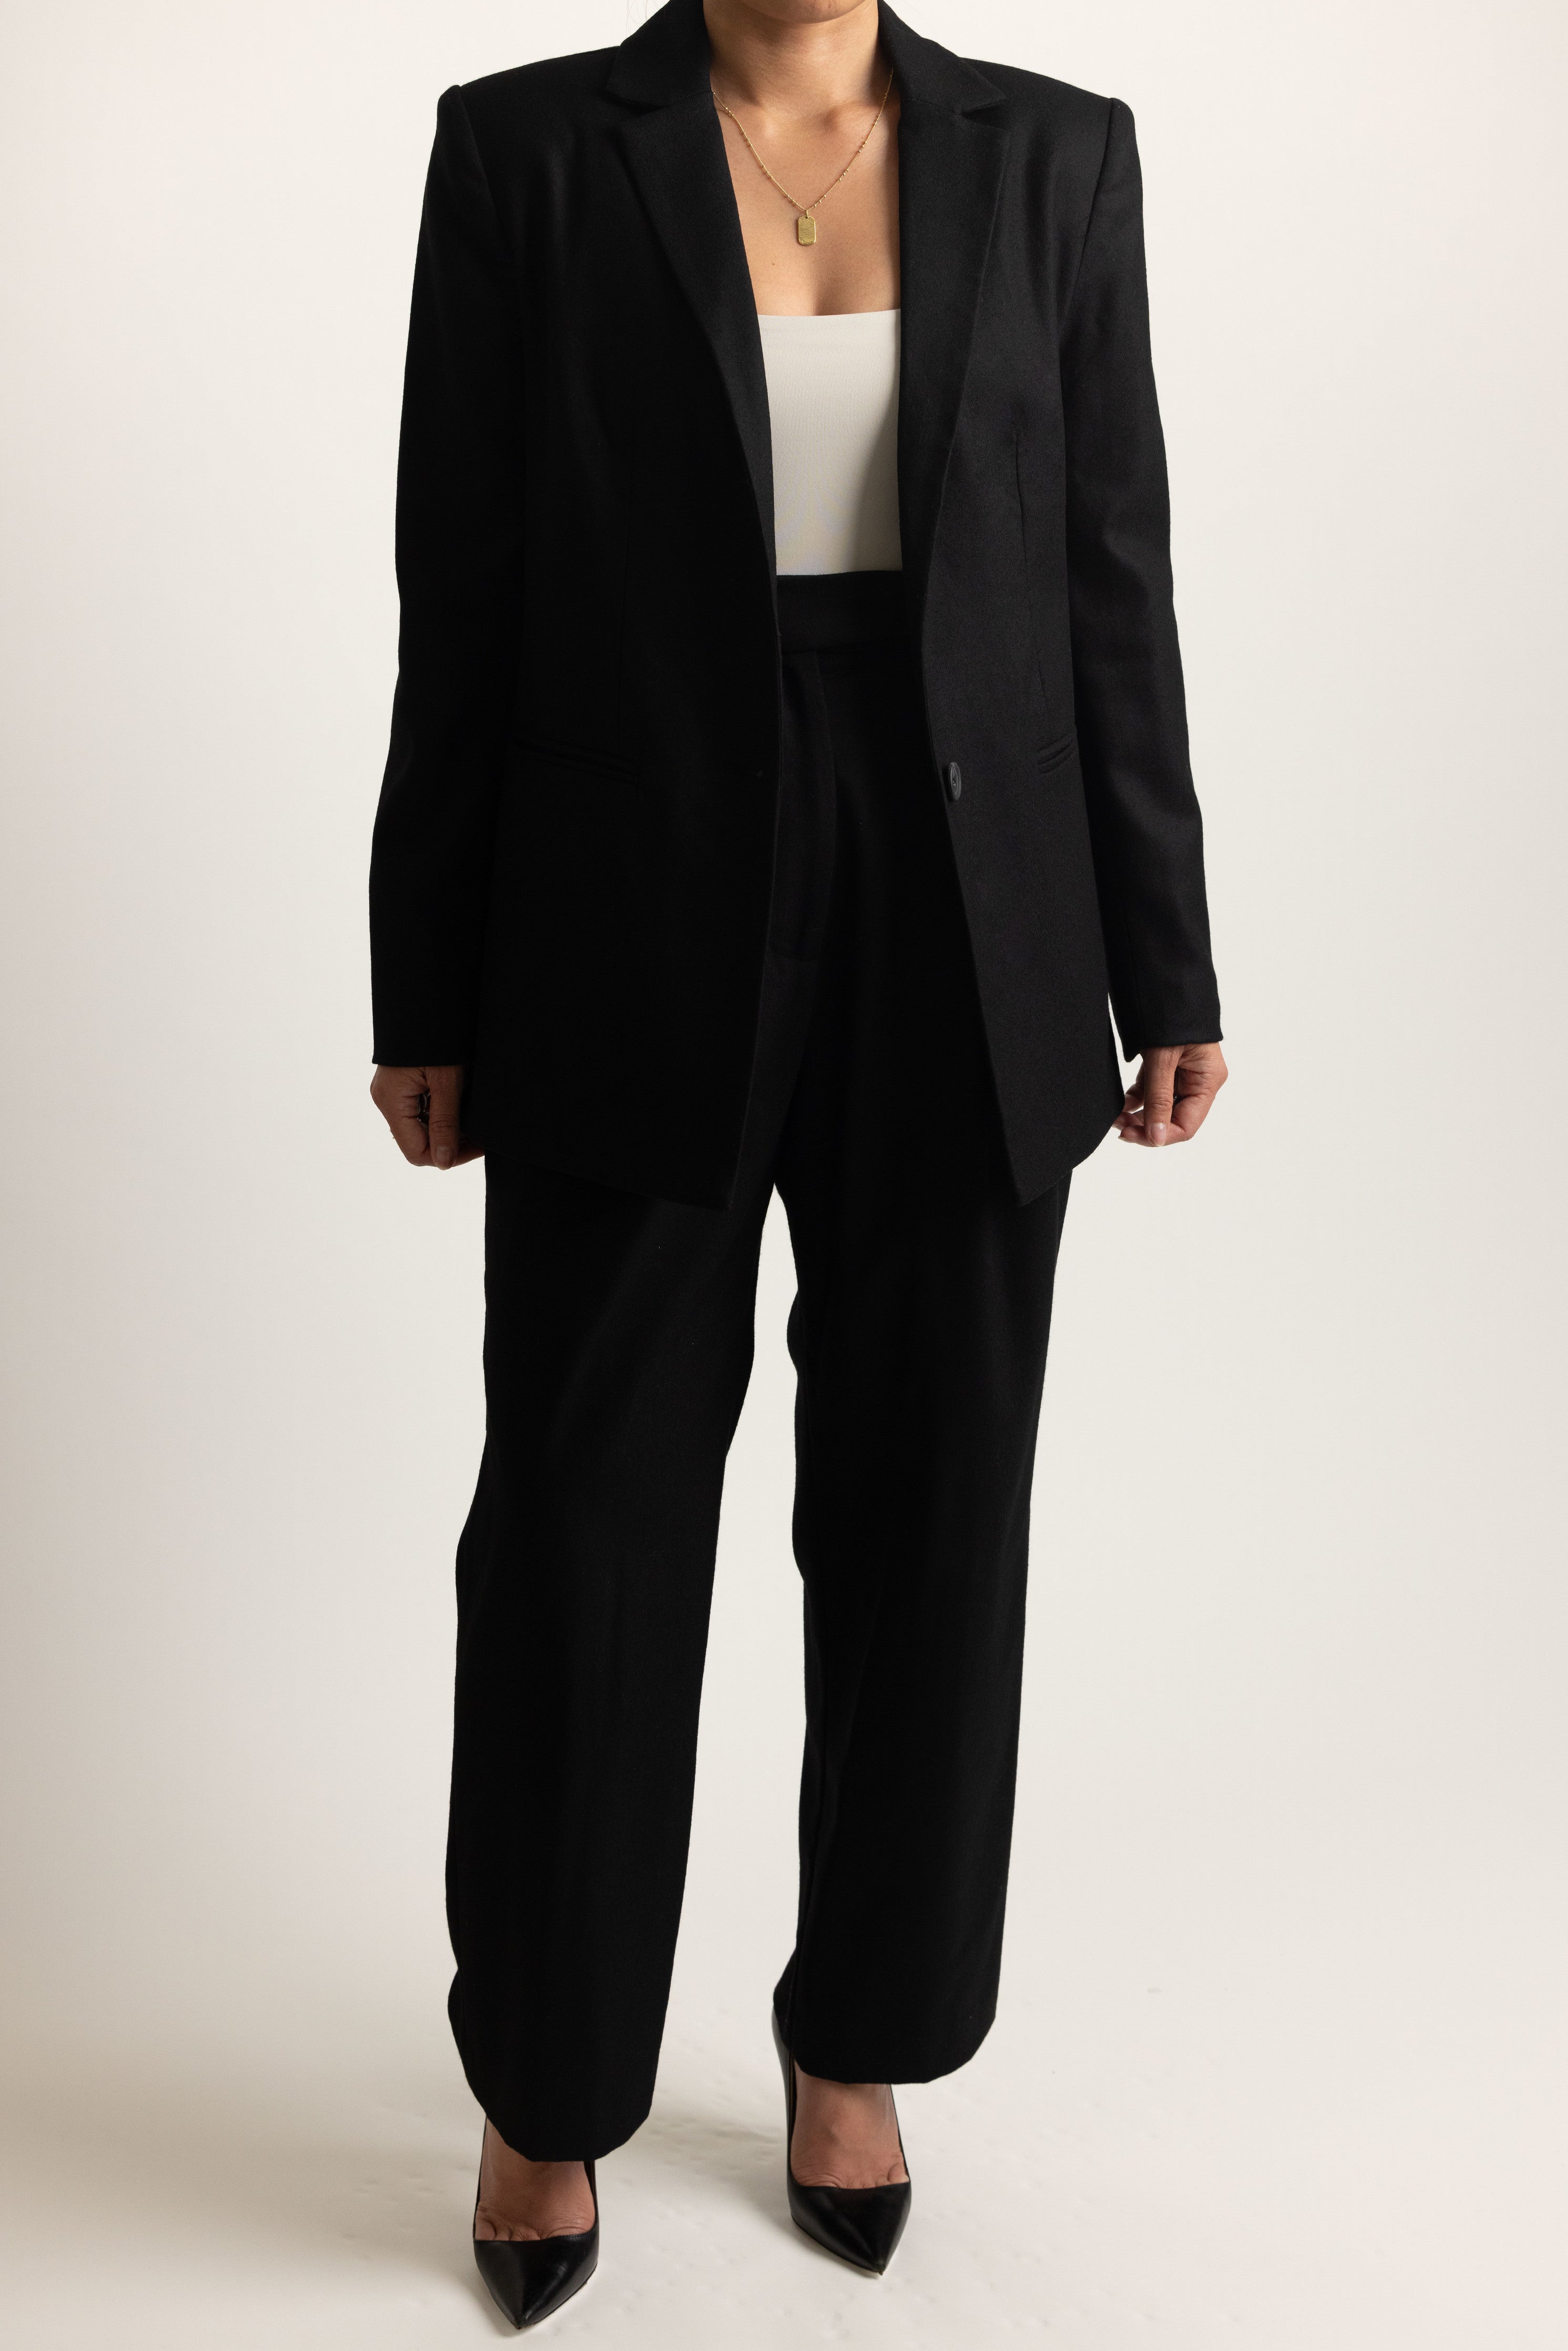 Court Jacket in Black - front view with matching Trial Trouser